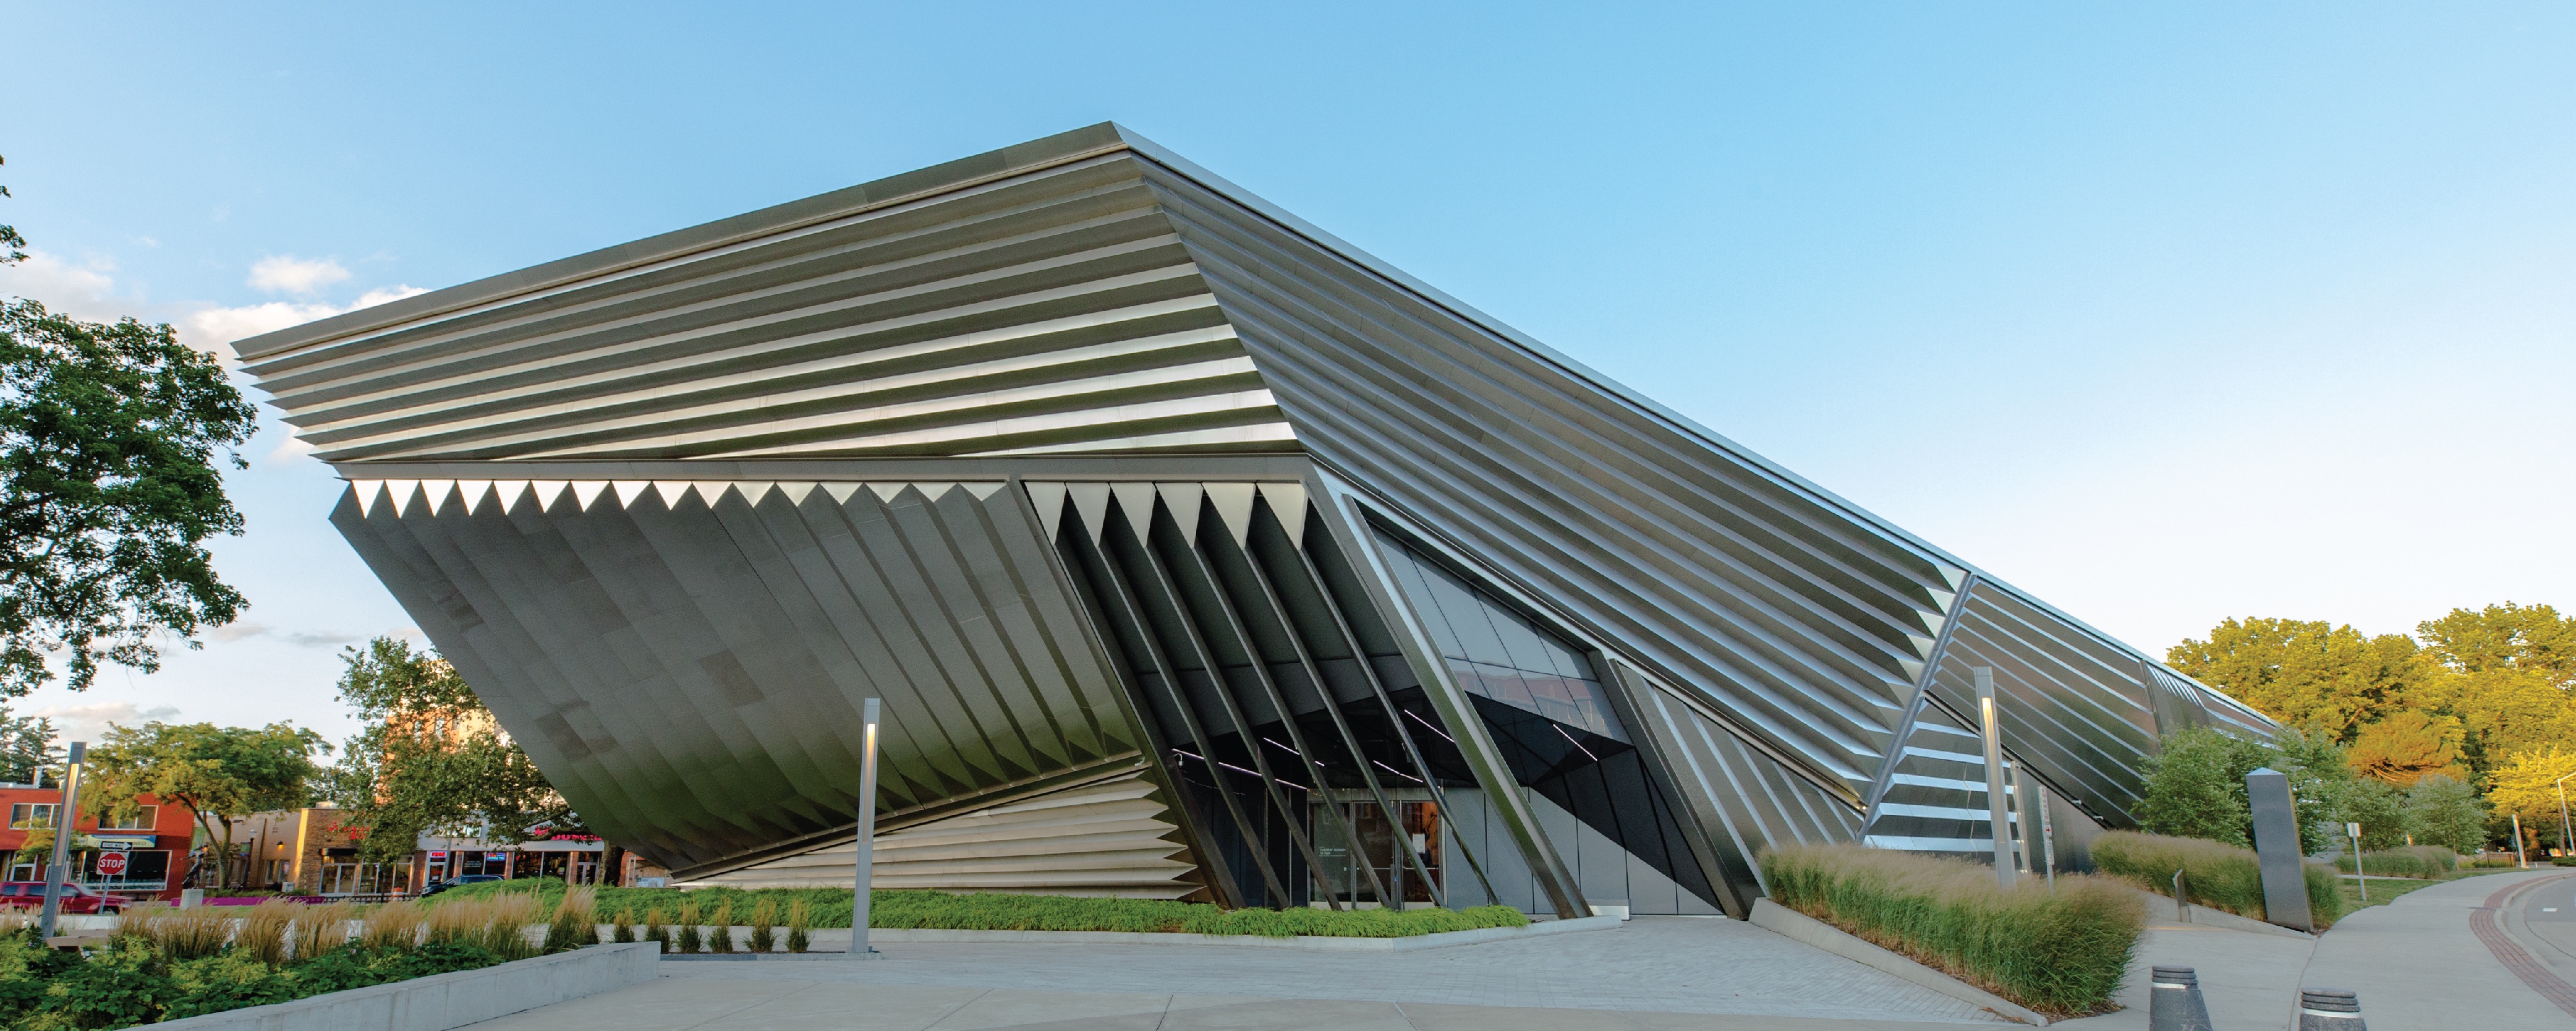 Exterior of the Broad Art Museum building architecture